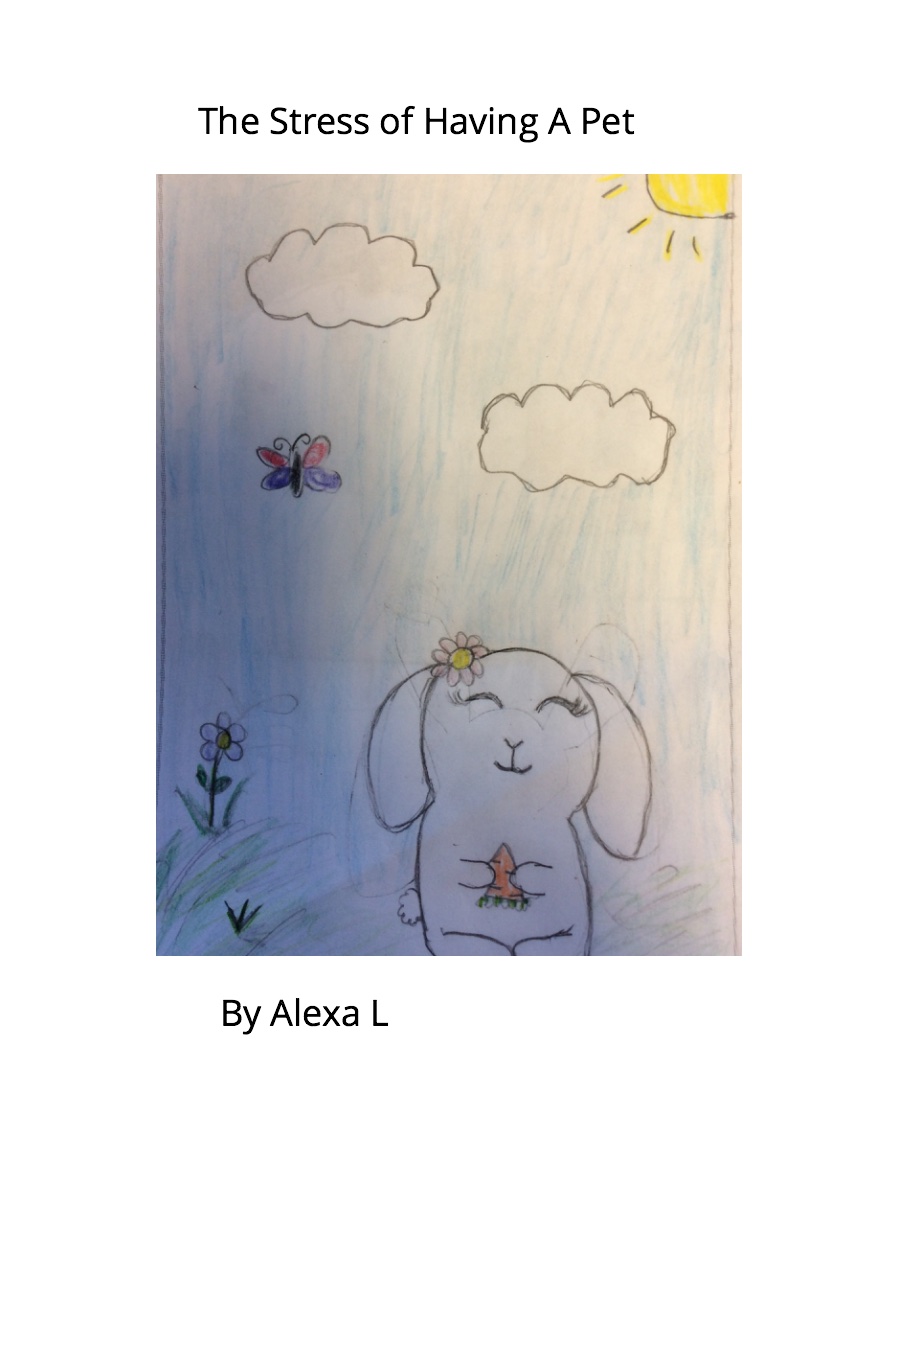 The Stress of Having a Pet by Alexa L